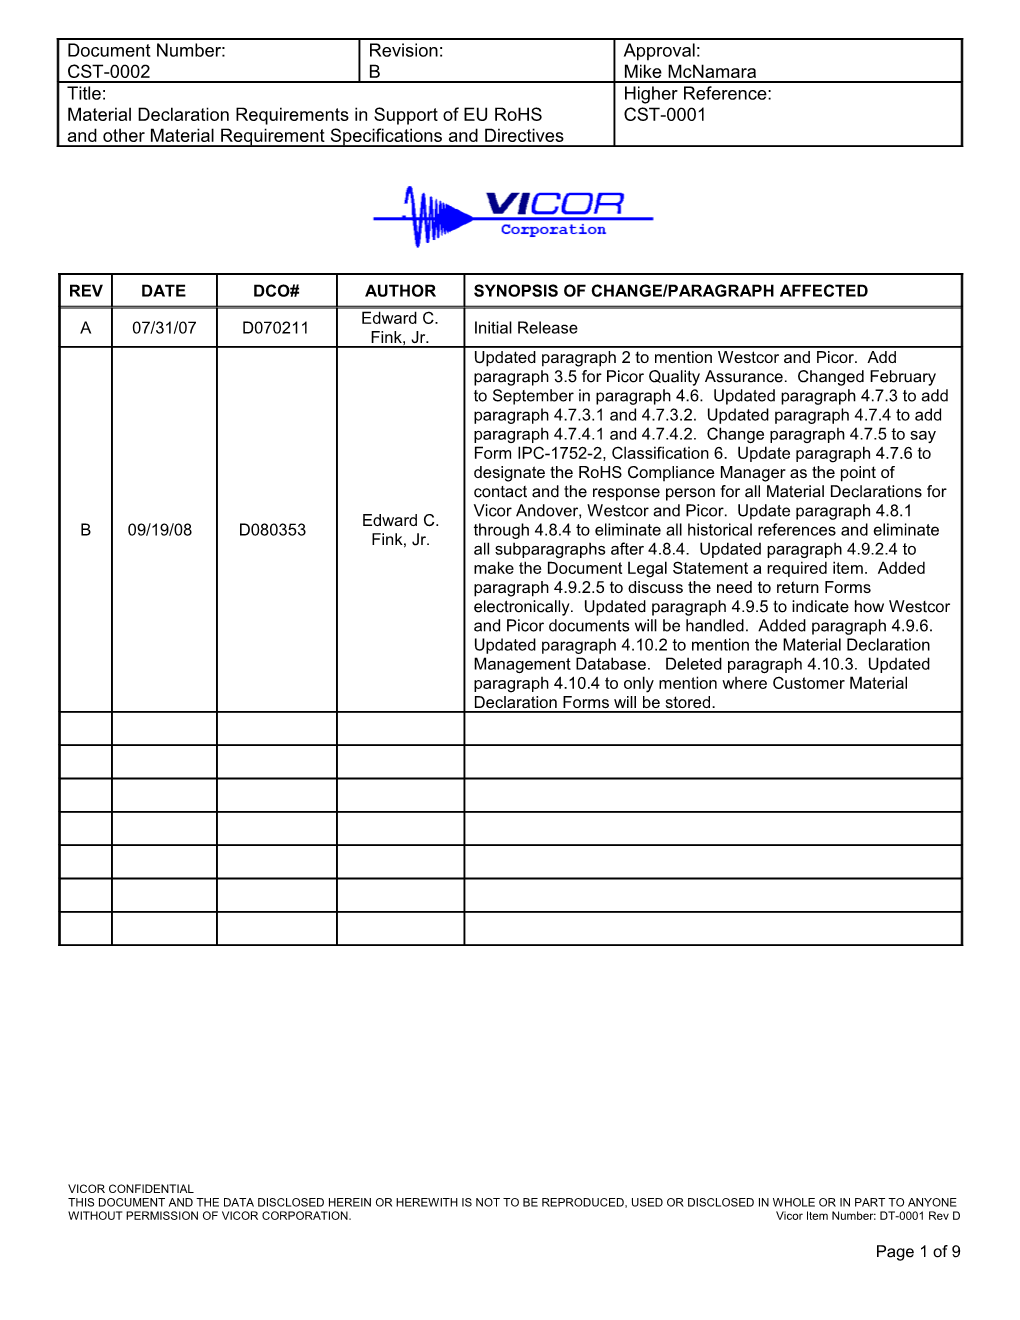 2.SCOPE: the Procedure Impacts Vicor Quality Personnel, Rohs Program Management and Vicor